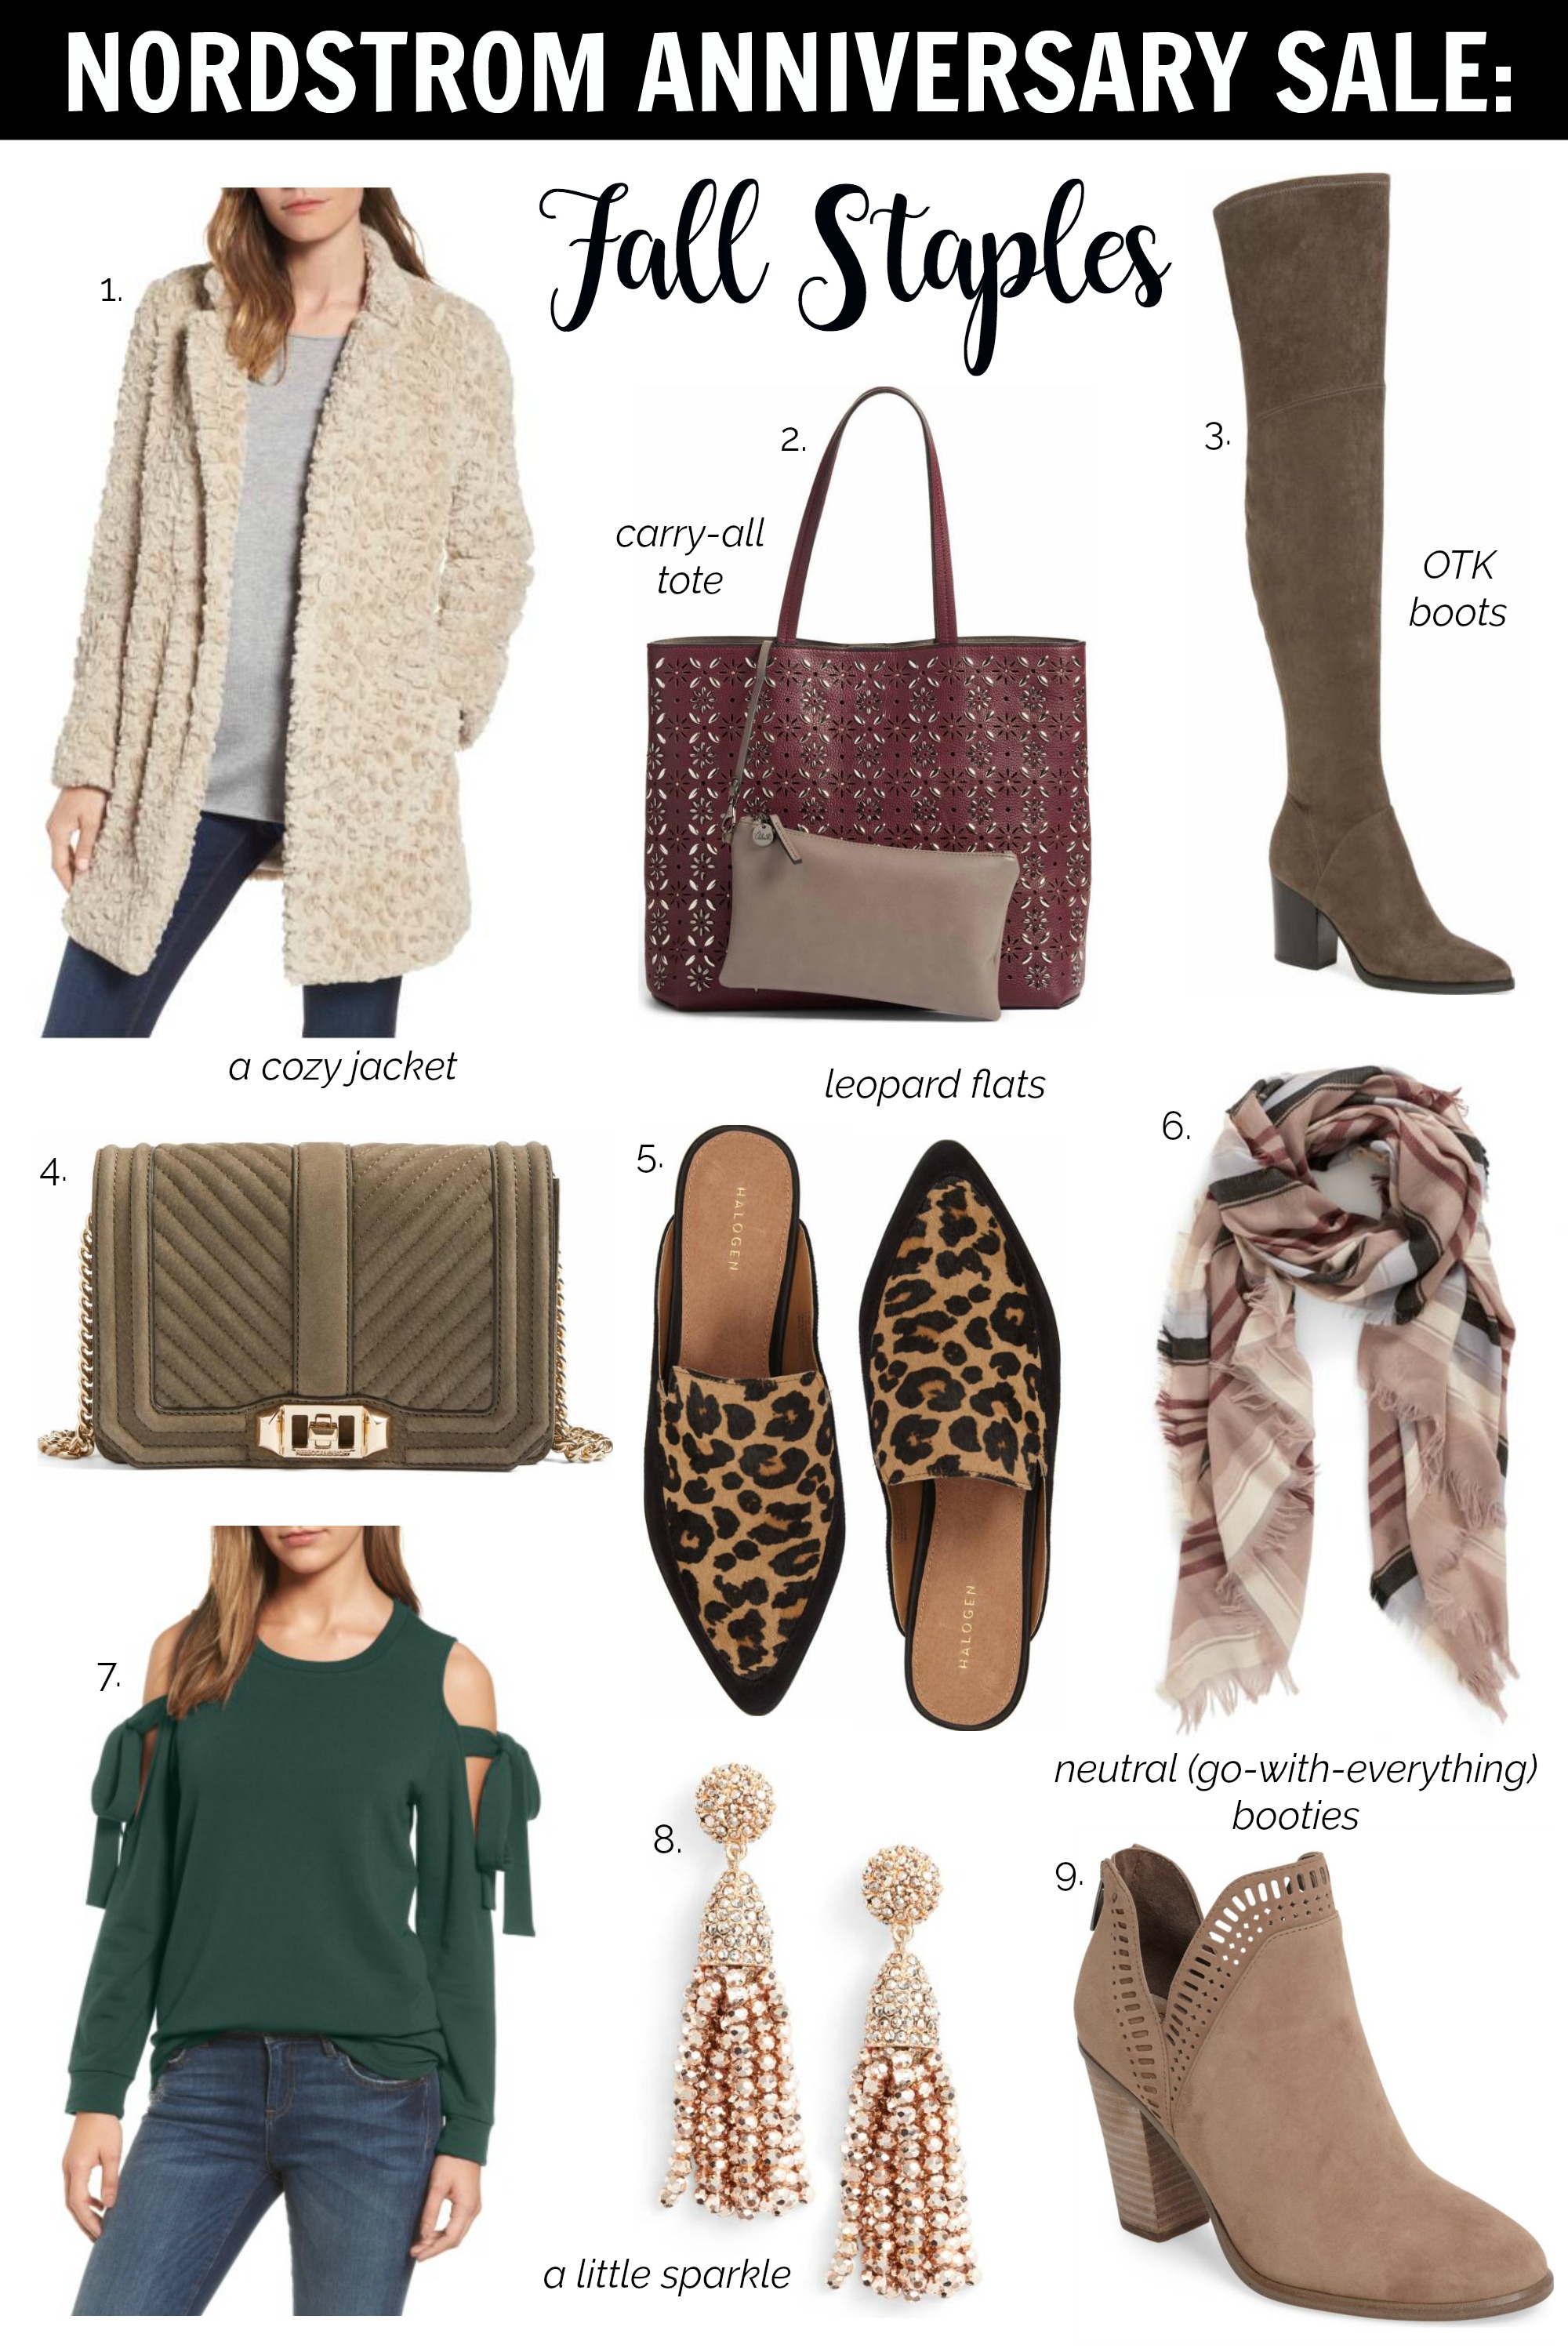 Nordstrom Anniversary Sale: Fall Staples - Medicine & Manicures